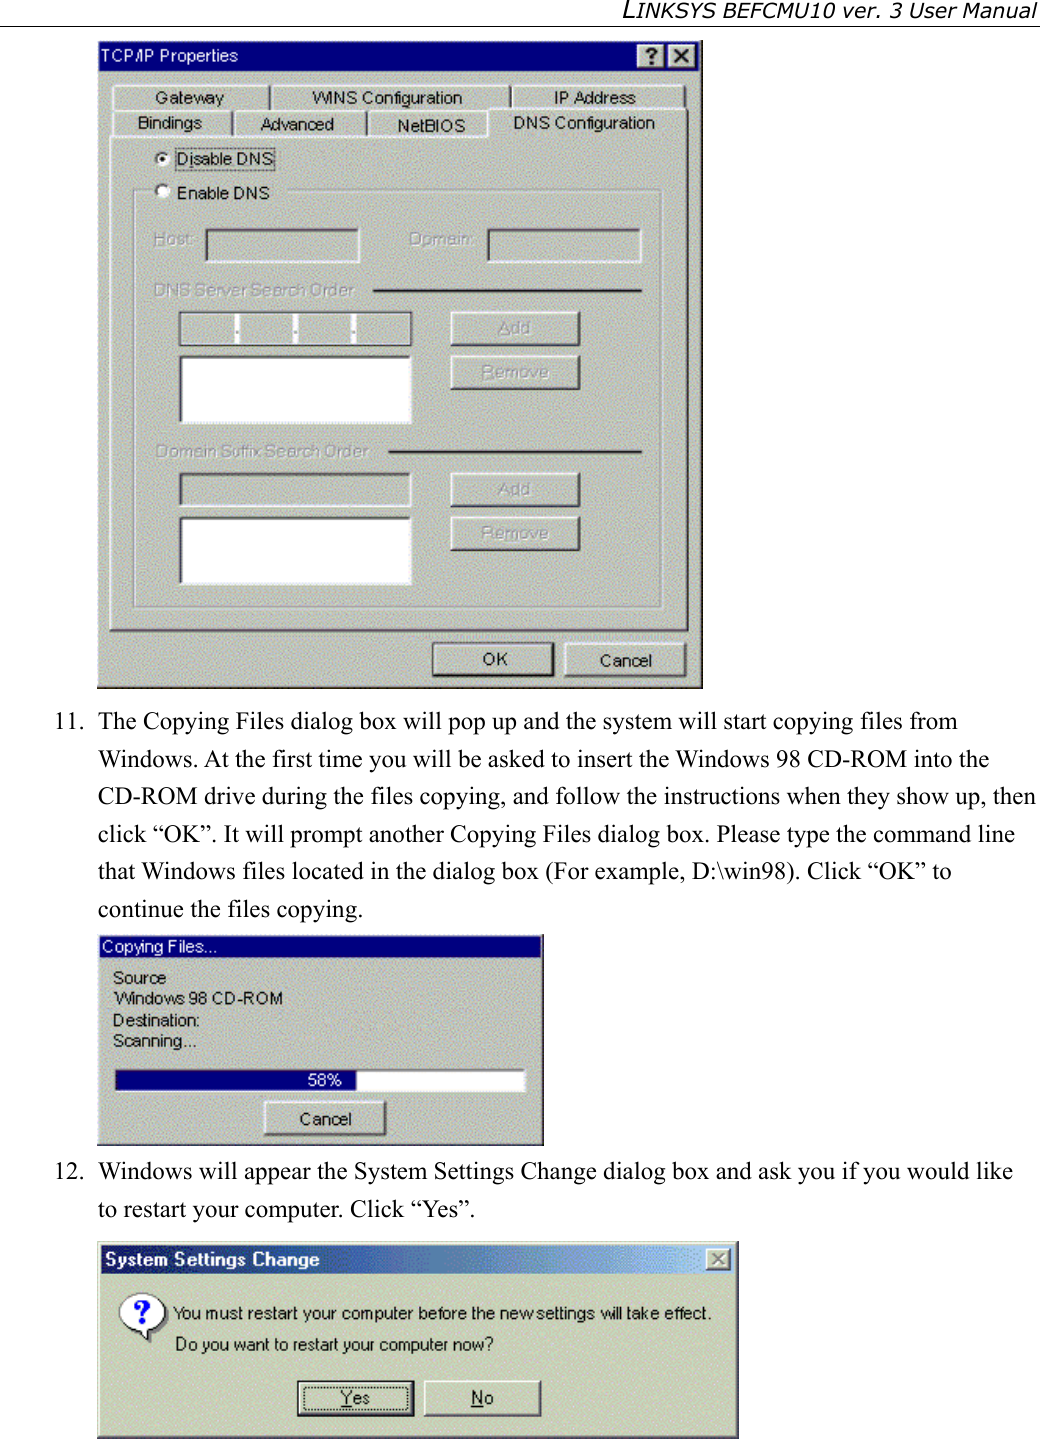 LINKSYS BEFCMU10 ver. 3 User Manual    11.  The Copying Files dialog box will pop up and the system will start copying files from Windows. At the first time you will be asked to insert the Windows 98 CD-ROM into the CD-ROM drive during the files copying, and follow the instructions when they show up, then click “OK”. It will prompt another Copying Files dialog box. Please type the command line that Windows files located in the dialog box (For example, D:\win98). Click “OK” to continue the files copying.  12.  Windows will appear the System Settings Change dialog box and ask you if you would like to restart your computer. Click “Yes”.   